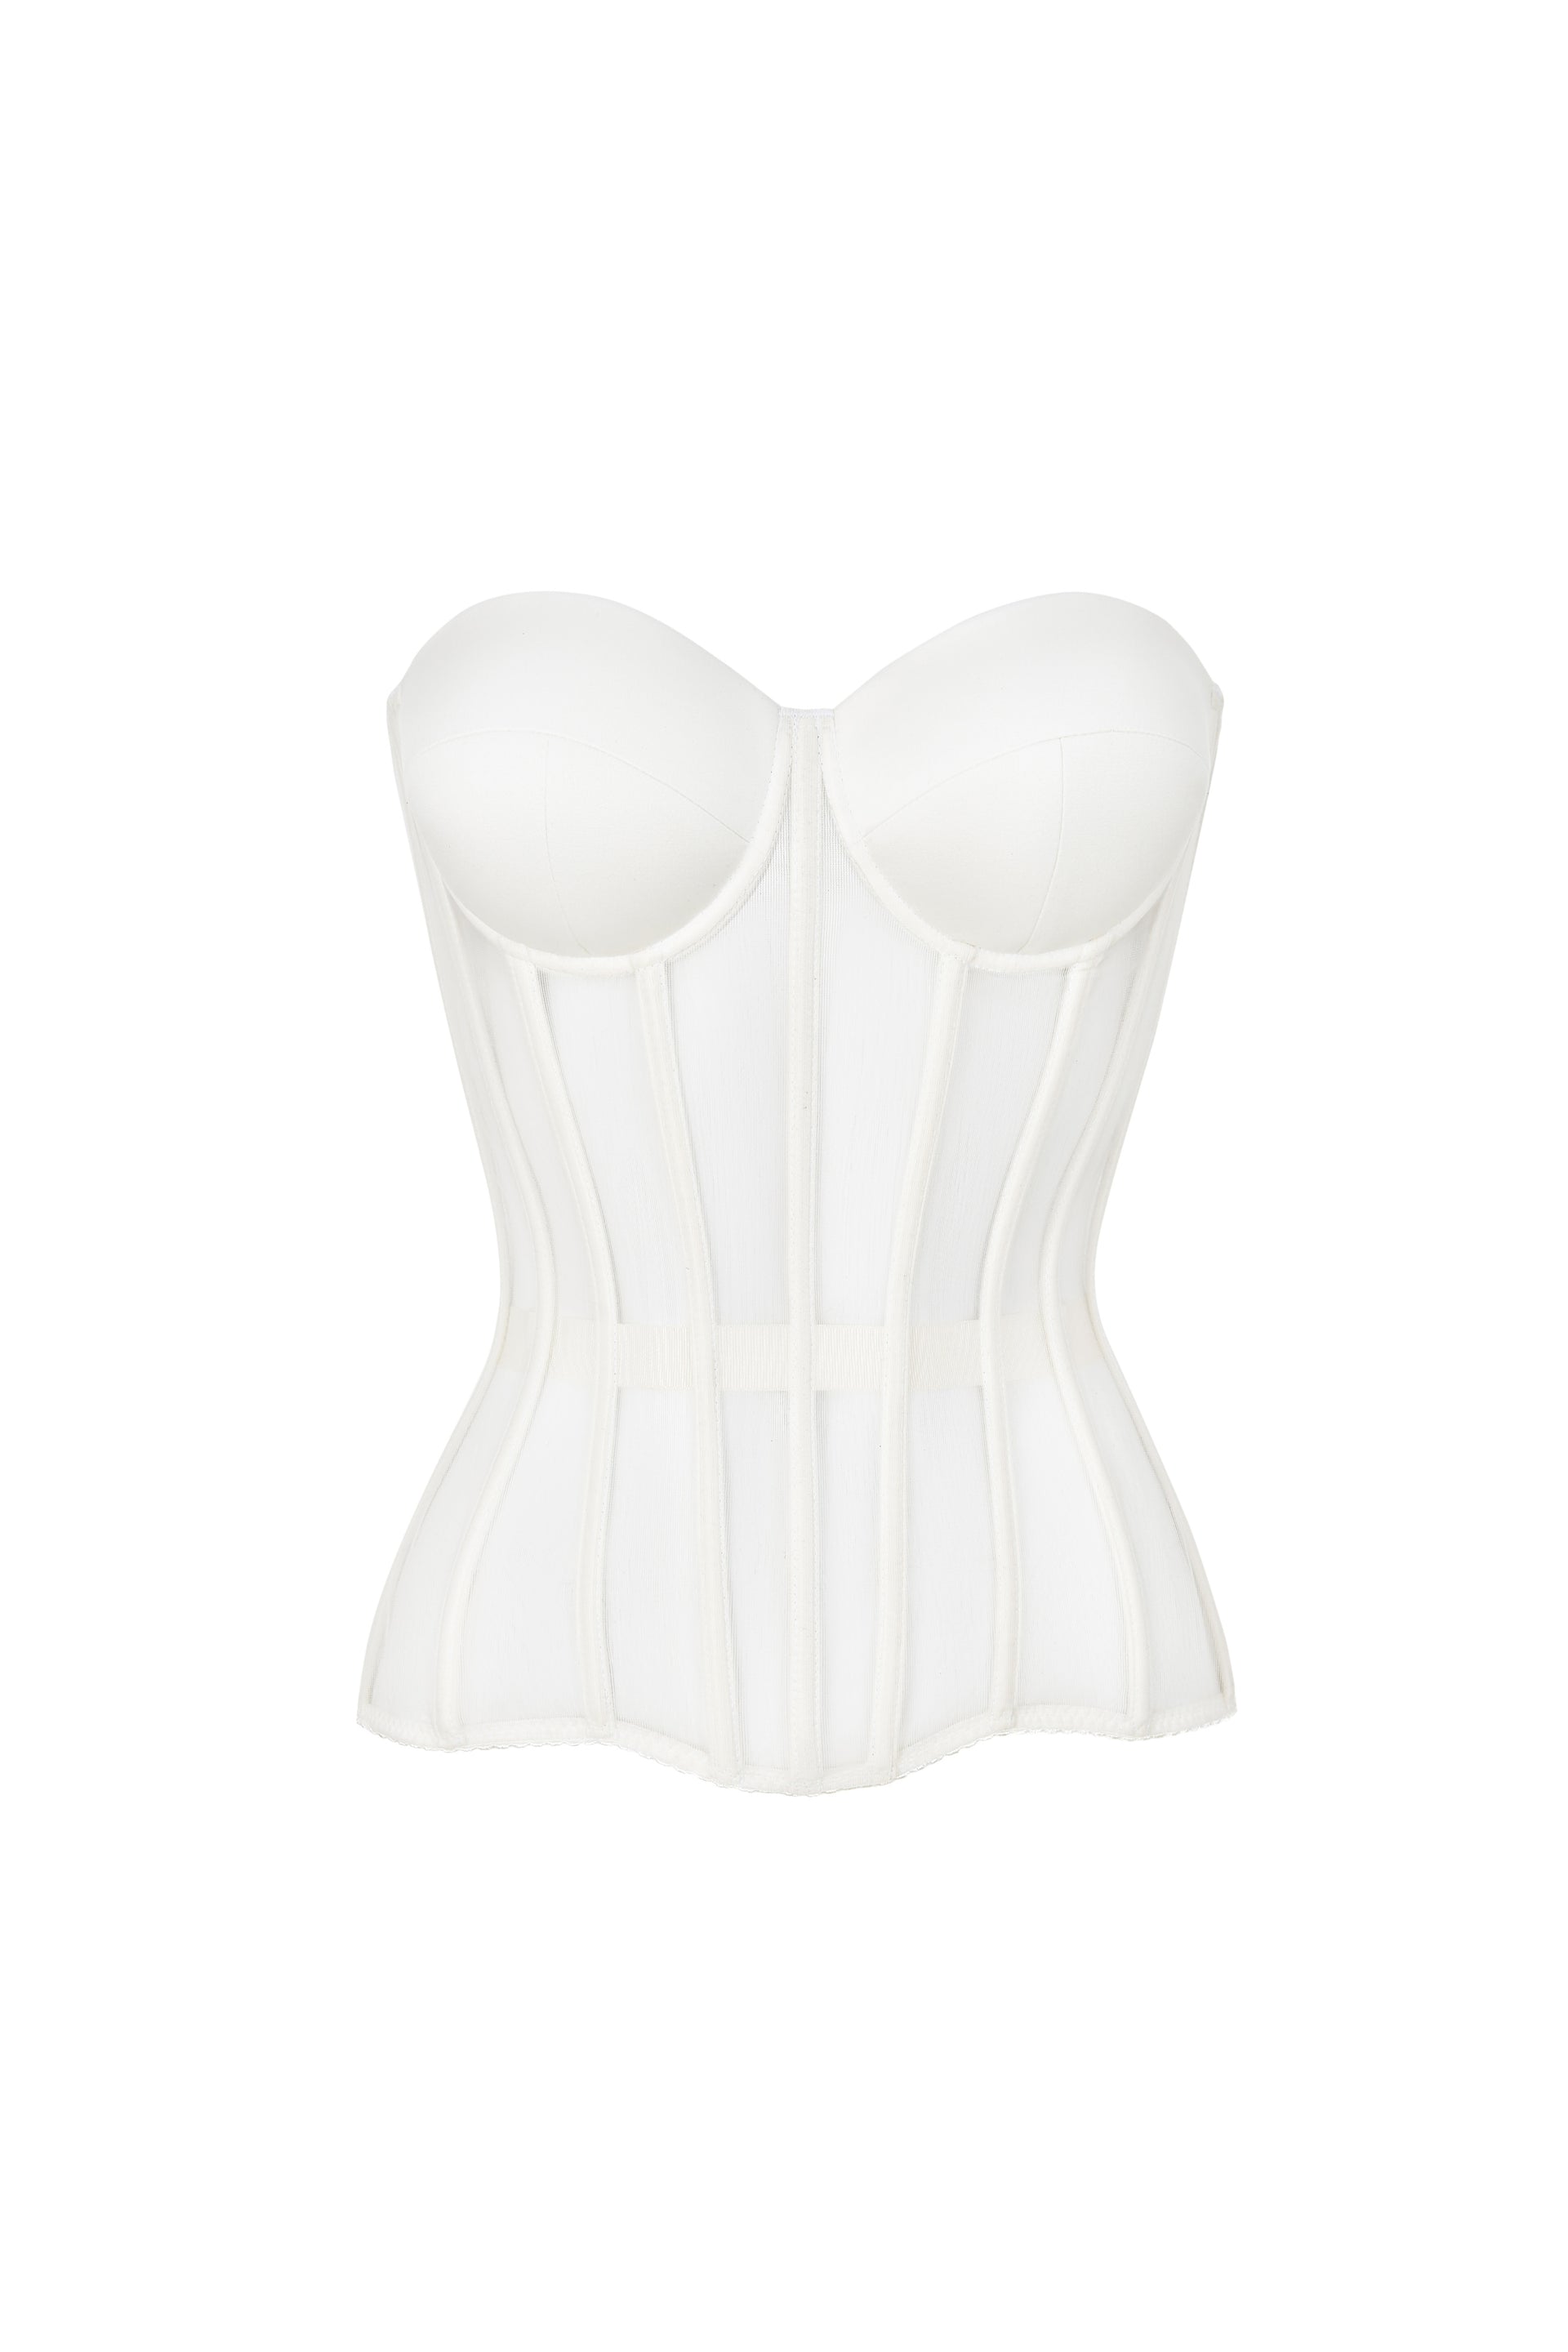 Off white corset with cups